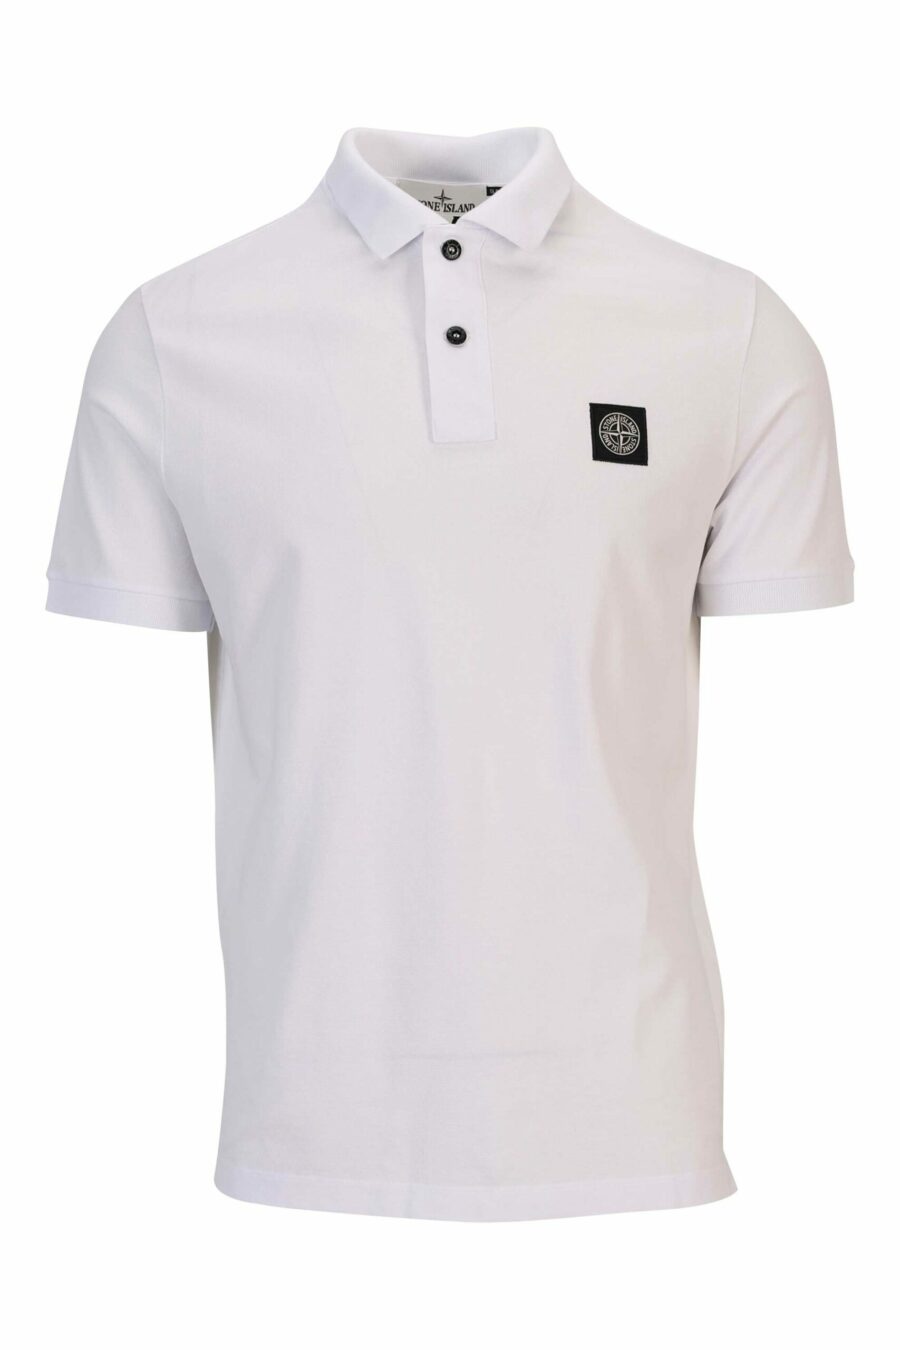 White slim fit polo shirt with mini logo compass patch - 8052572856815 scaled